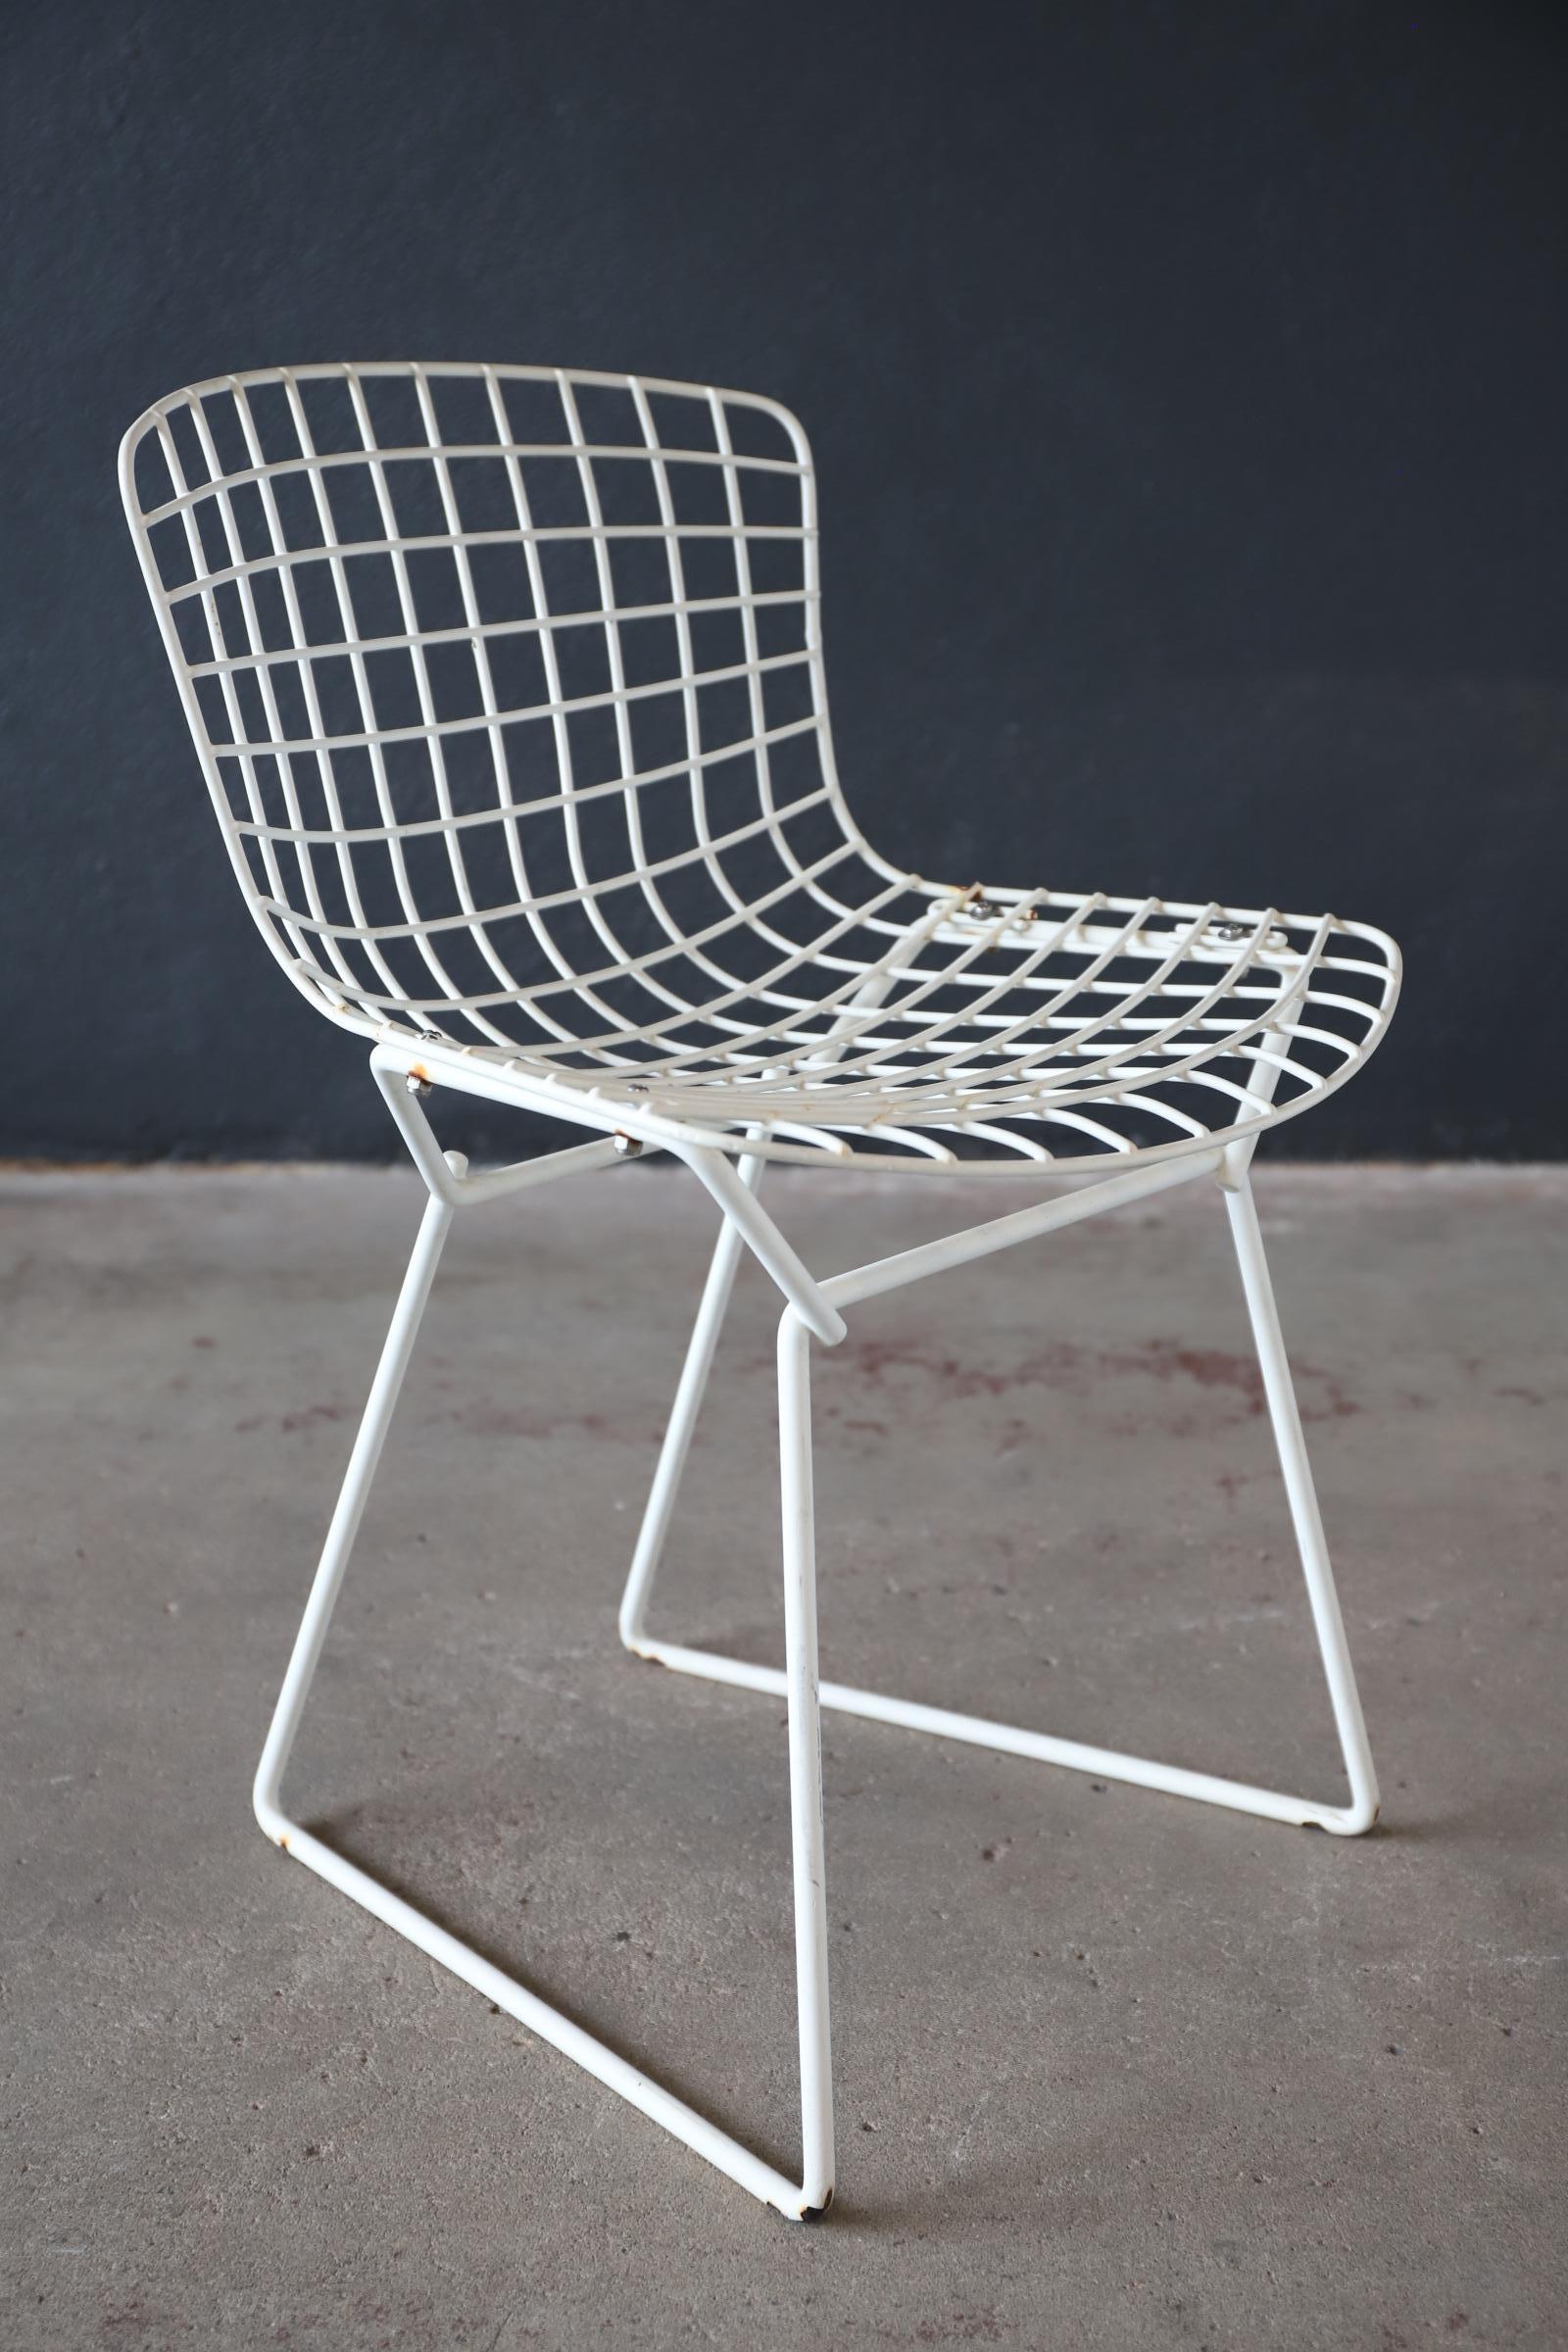 A staple design from famous designer Harry Bertoia for Knoll. A child’s Size wire side chair. Great for indoor or outdoor use. Your kid will definitely have the coolest chair on the block. Photographed with Eames chair for scale.